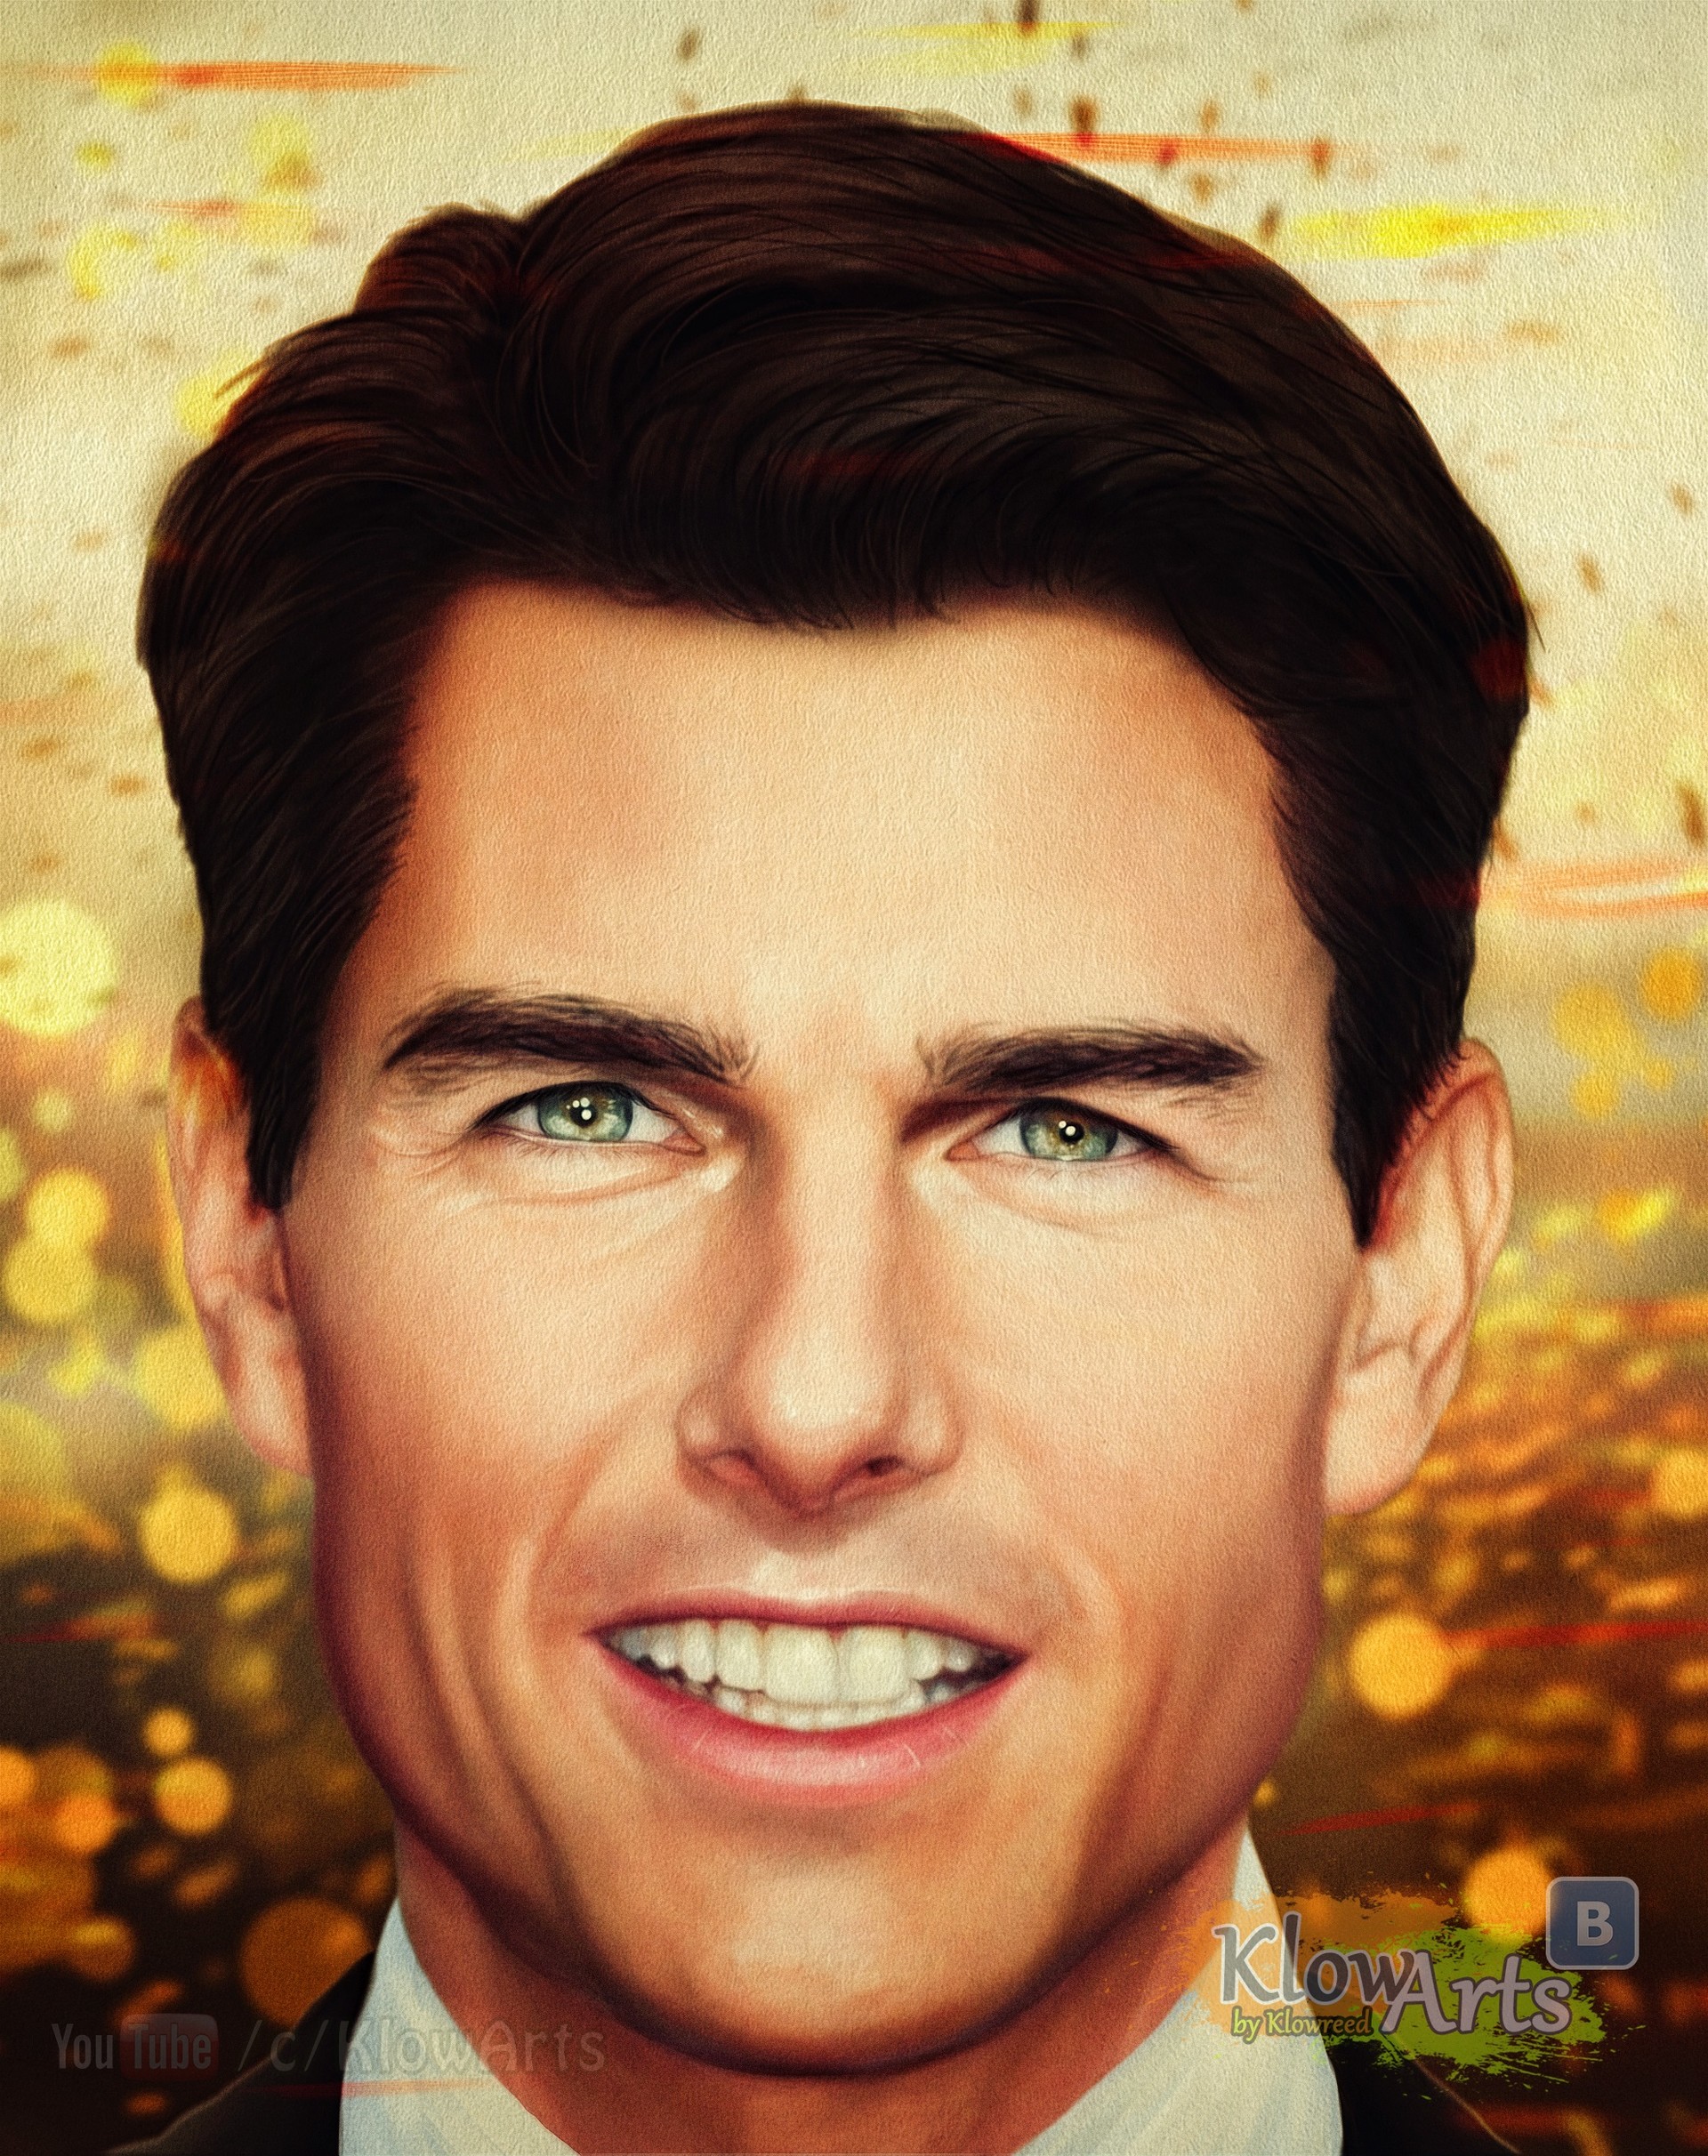 Awesome Pencil Sketch Of Tom Cruise | DesiPainters.com